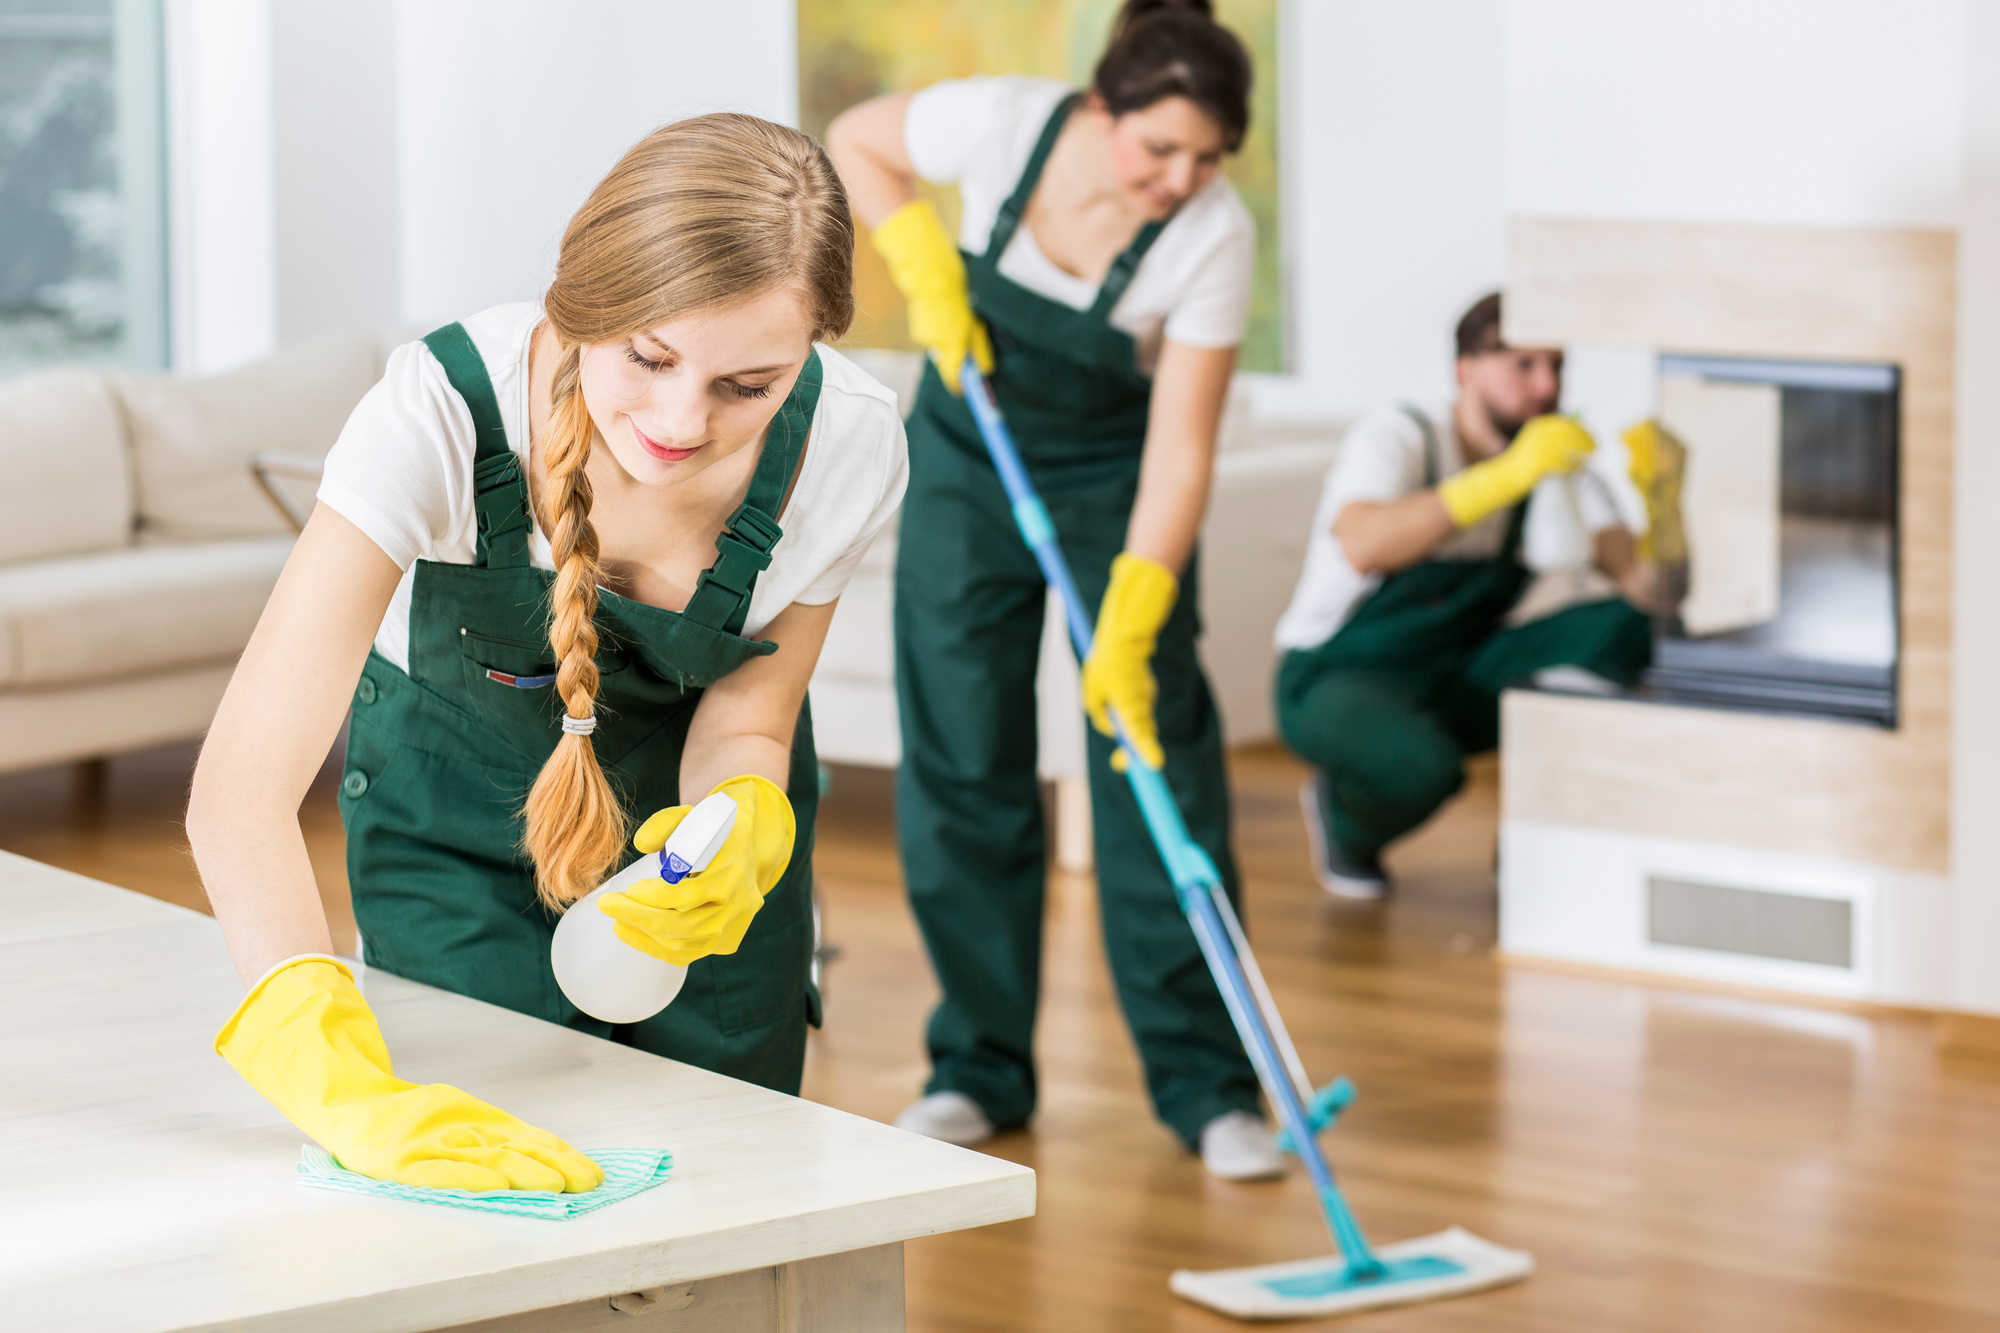 Typical House Cleaning Service: How Much Does It Cost?